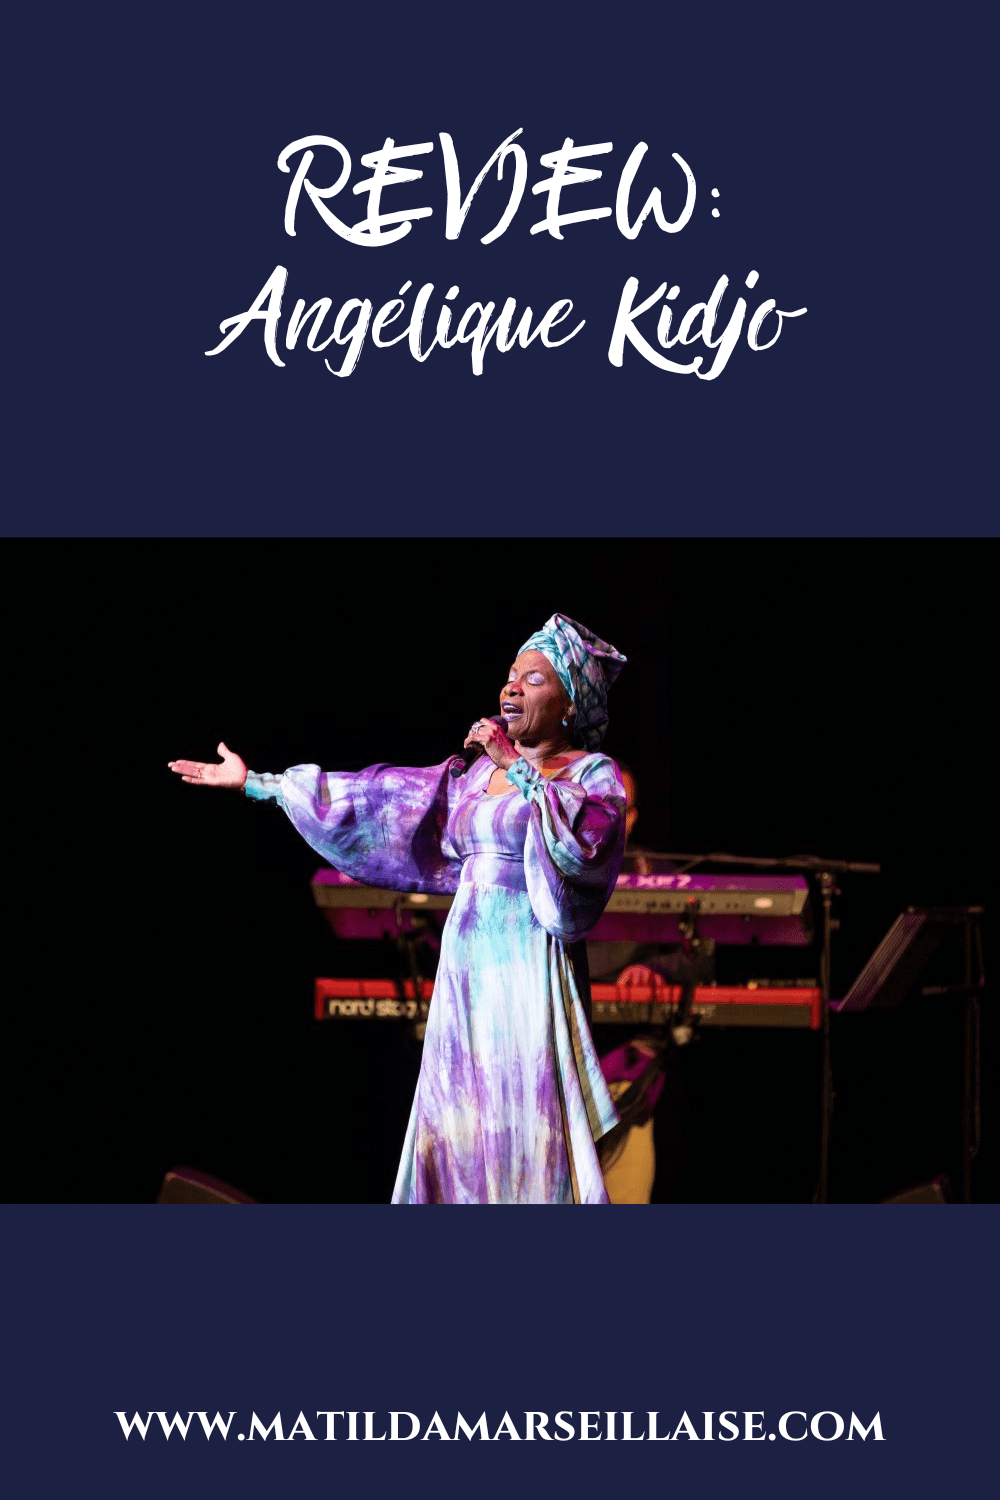 Angélique Kidjo brought everyone to their feet at the Adelaide Festival Theatre last night for her 40th anniversary tour